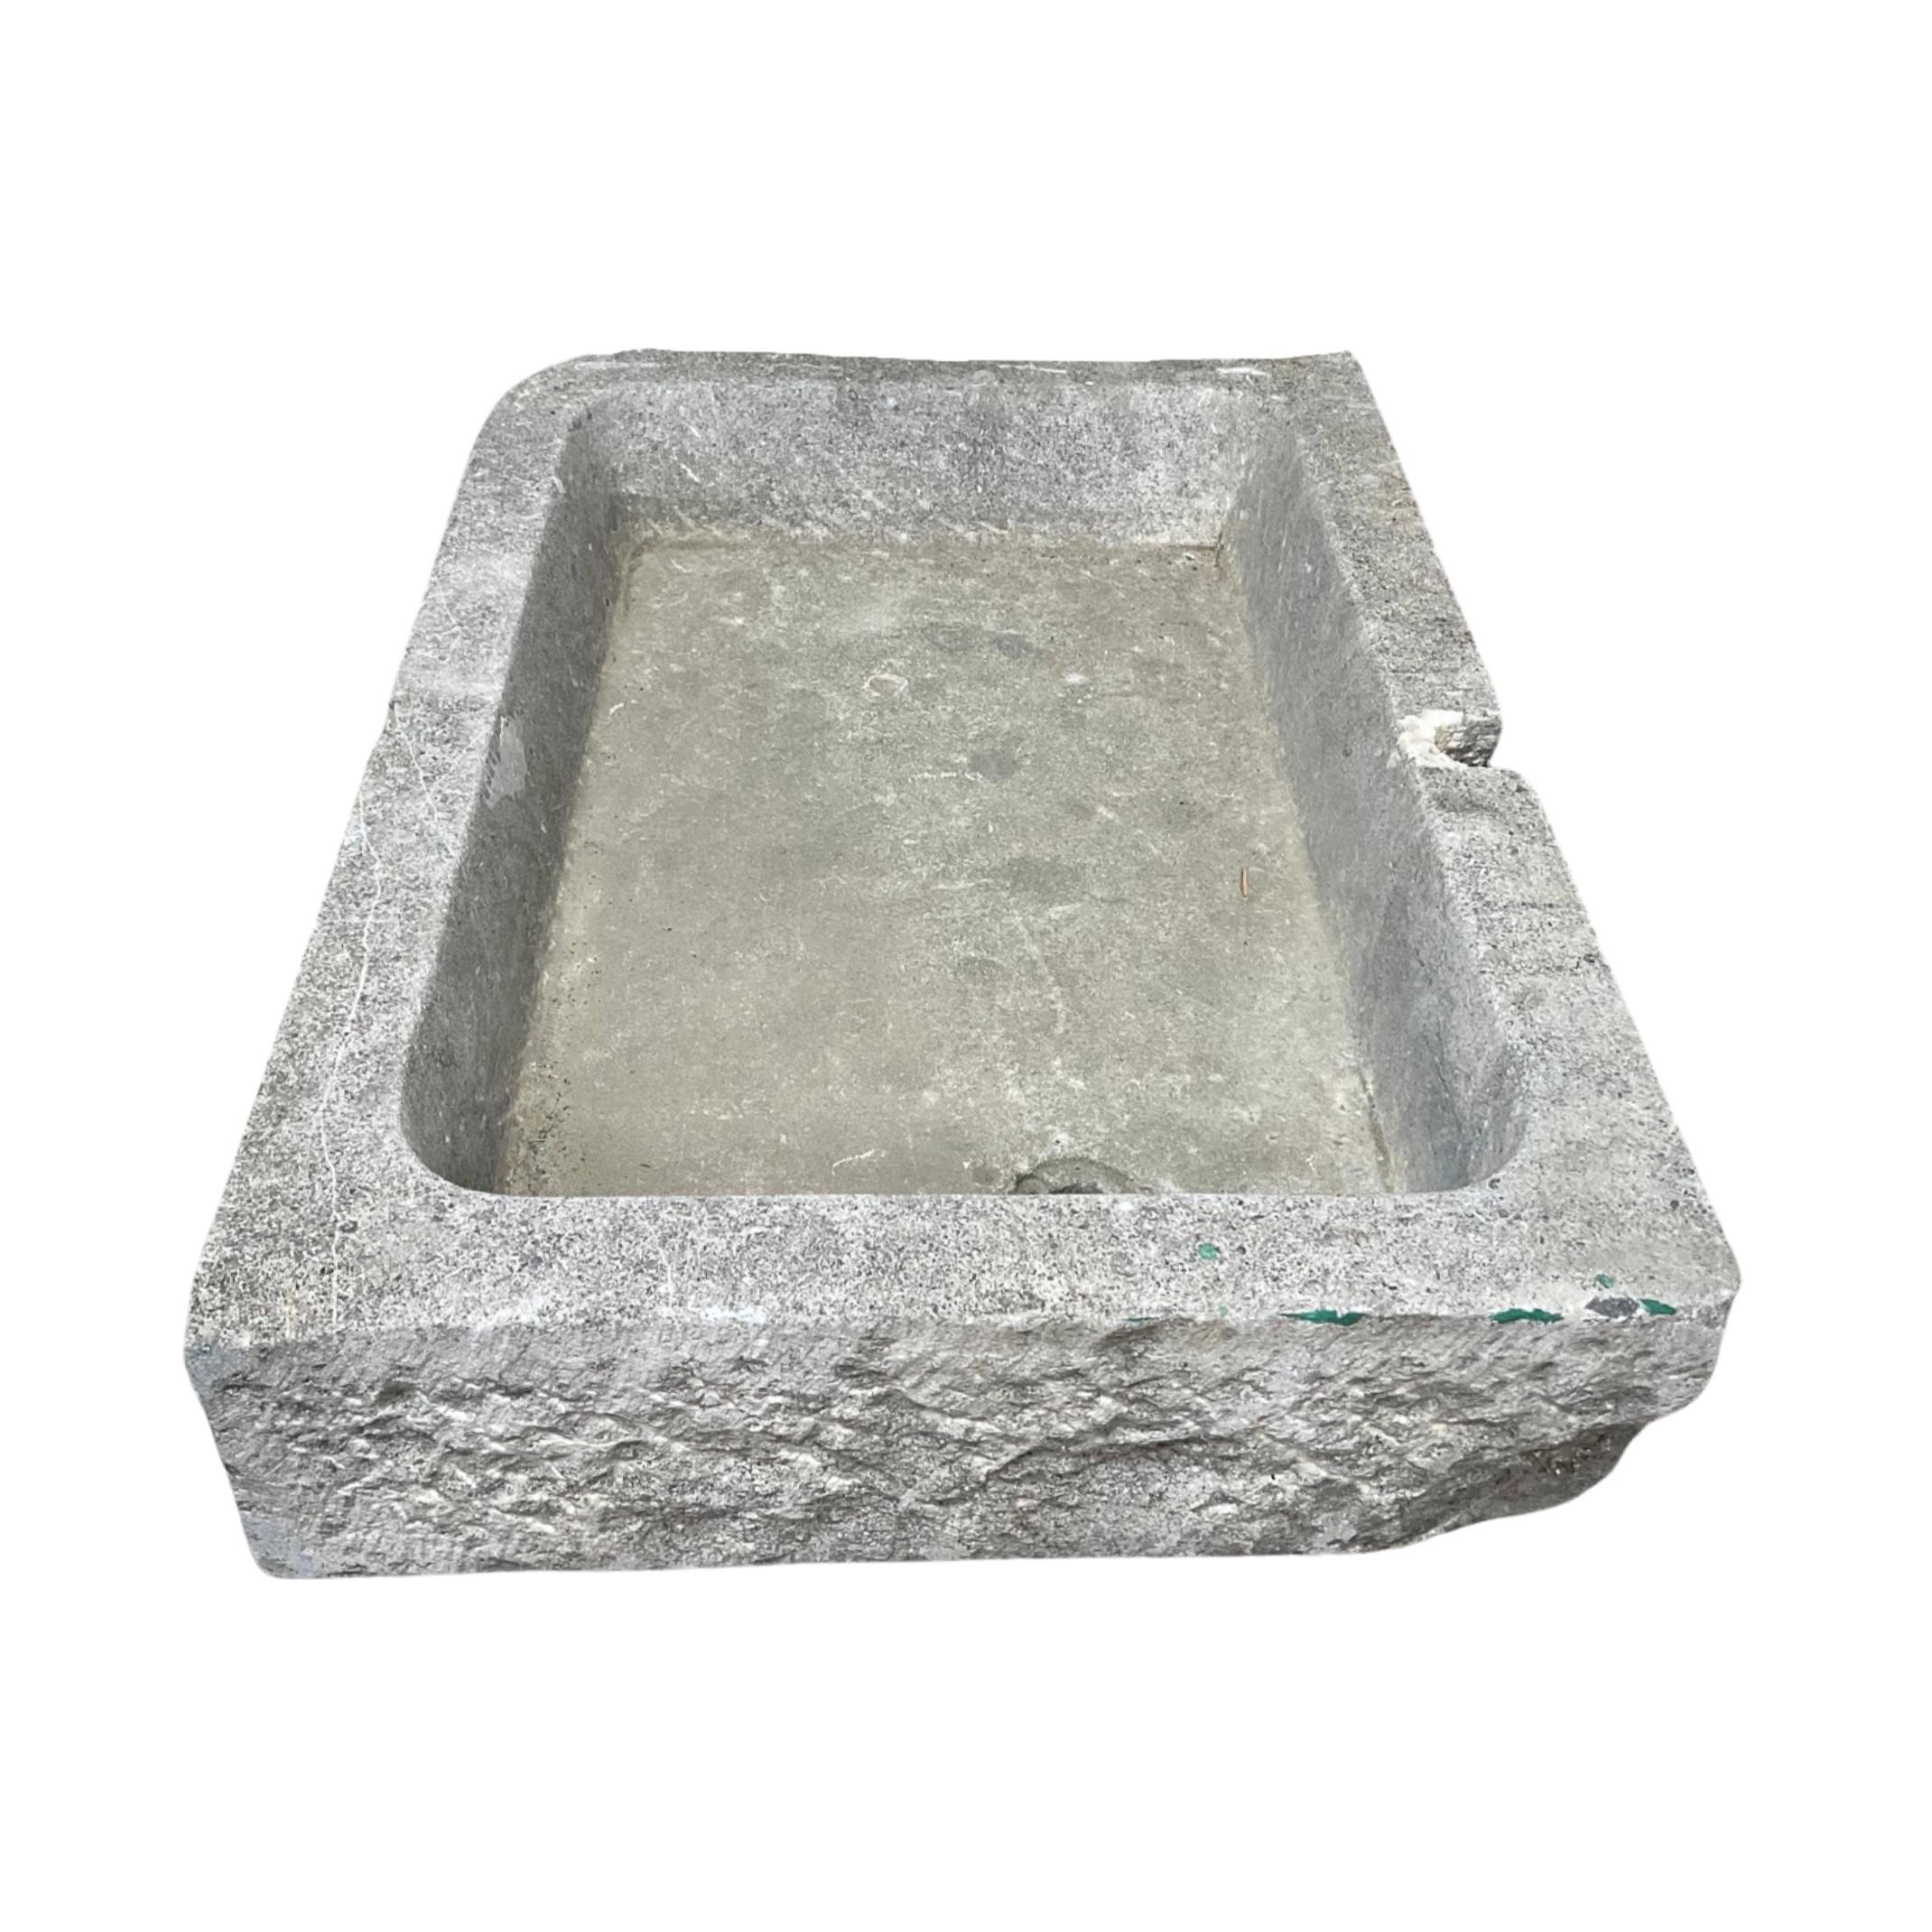 This unique Belgium Bluestone Sink is a truly one-of-a-kind item from the 18th century. It is crafted from the highest quality bluestone and boasts a predrilled drainage hole for efficient water flow. Add a piece of history to your home or office